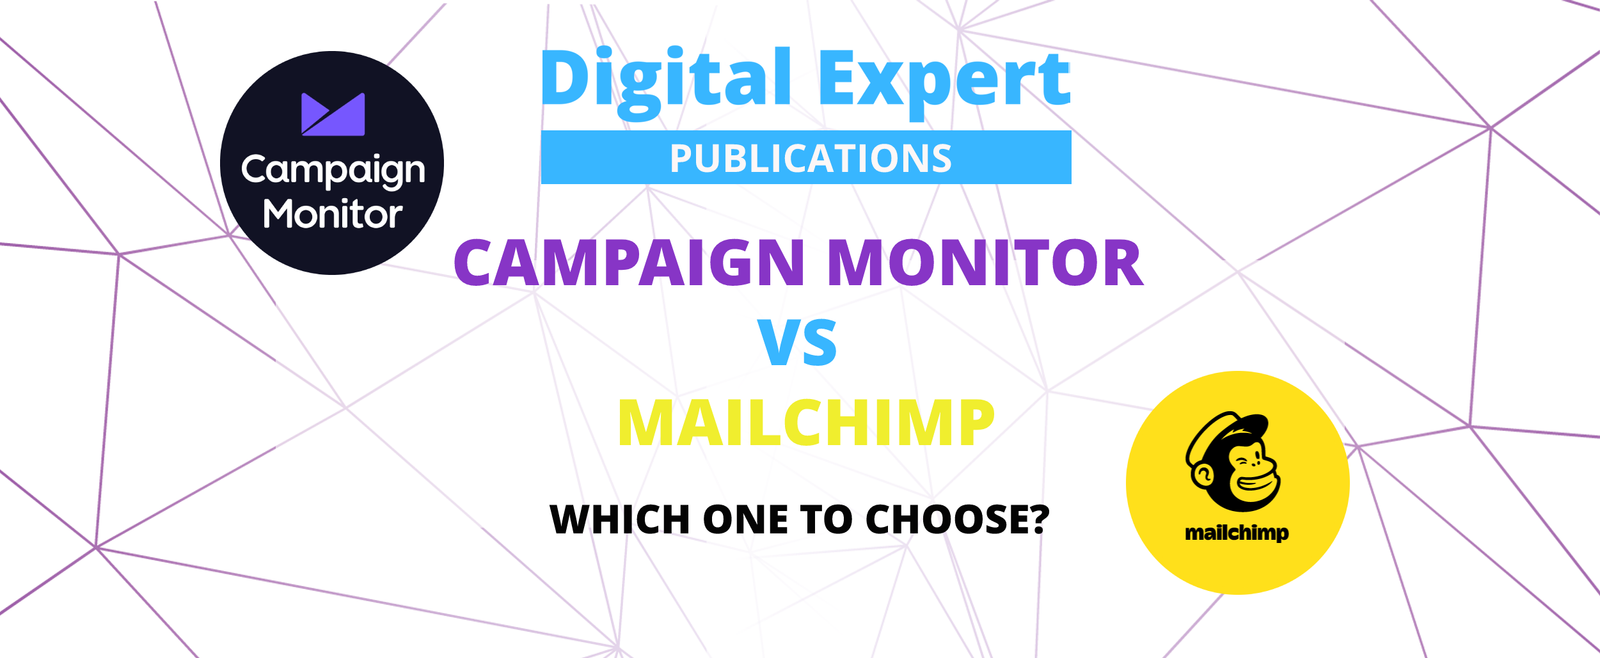 Campaign Monitor vs Mailchimp. Which One to Choose? Service comparison - Digital Expert